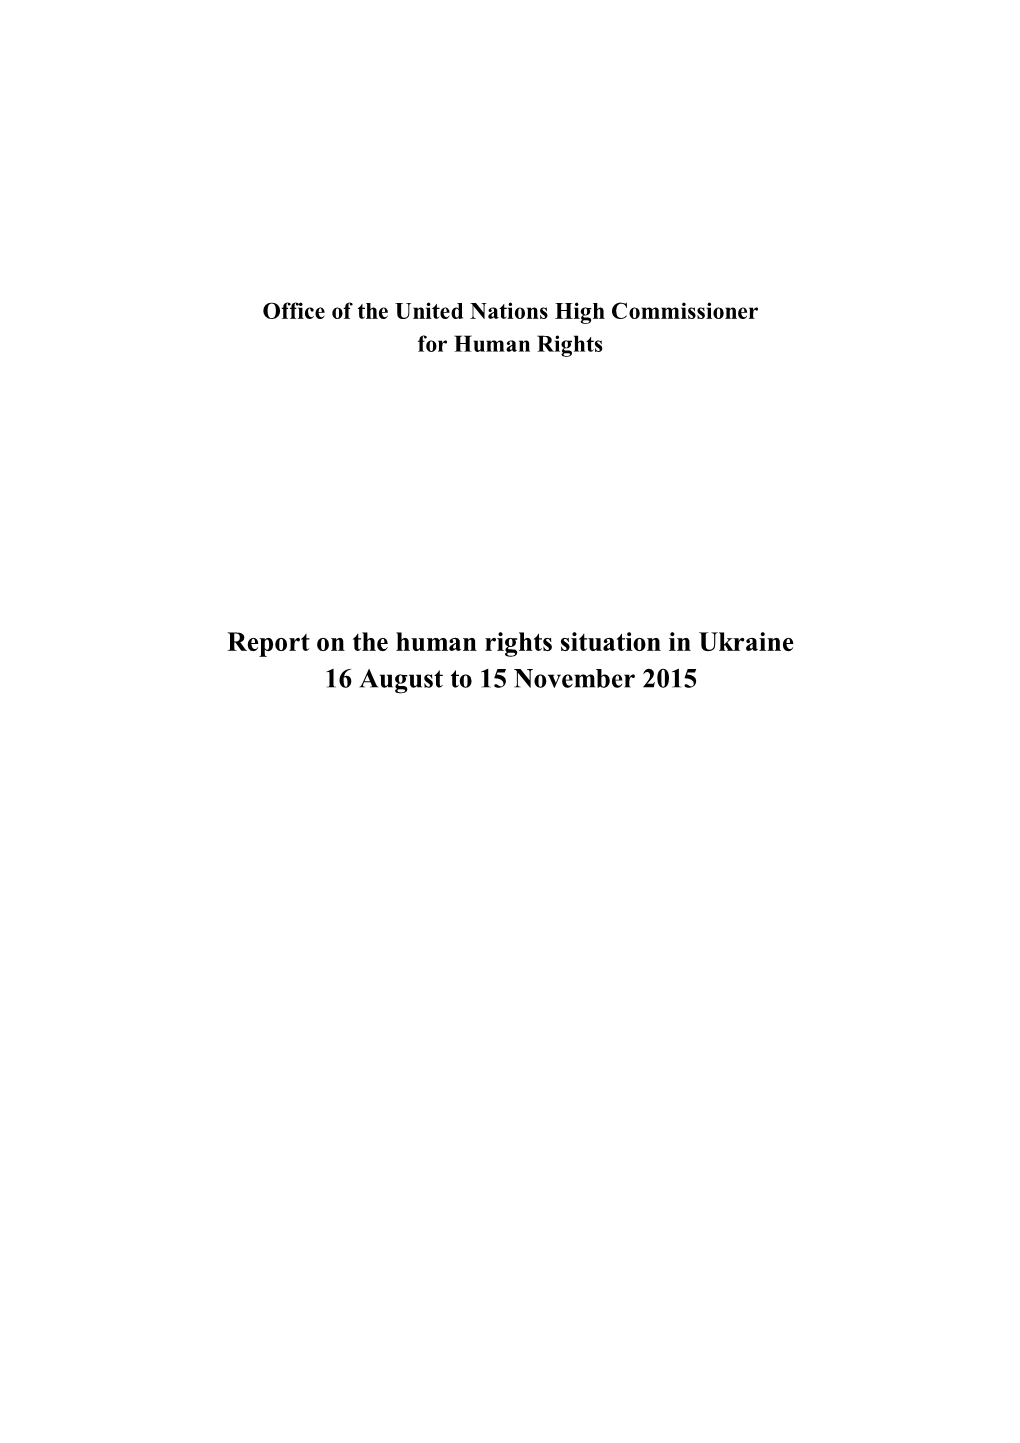 Report on the Human Rights Situation in Ukraine 16 August to 15 November 2015